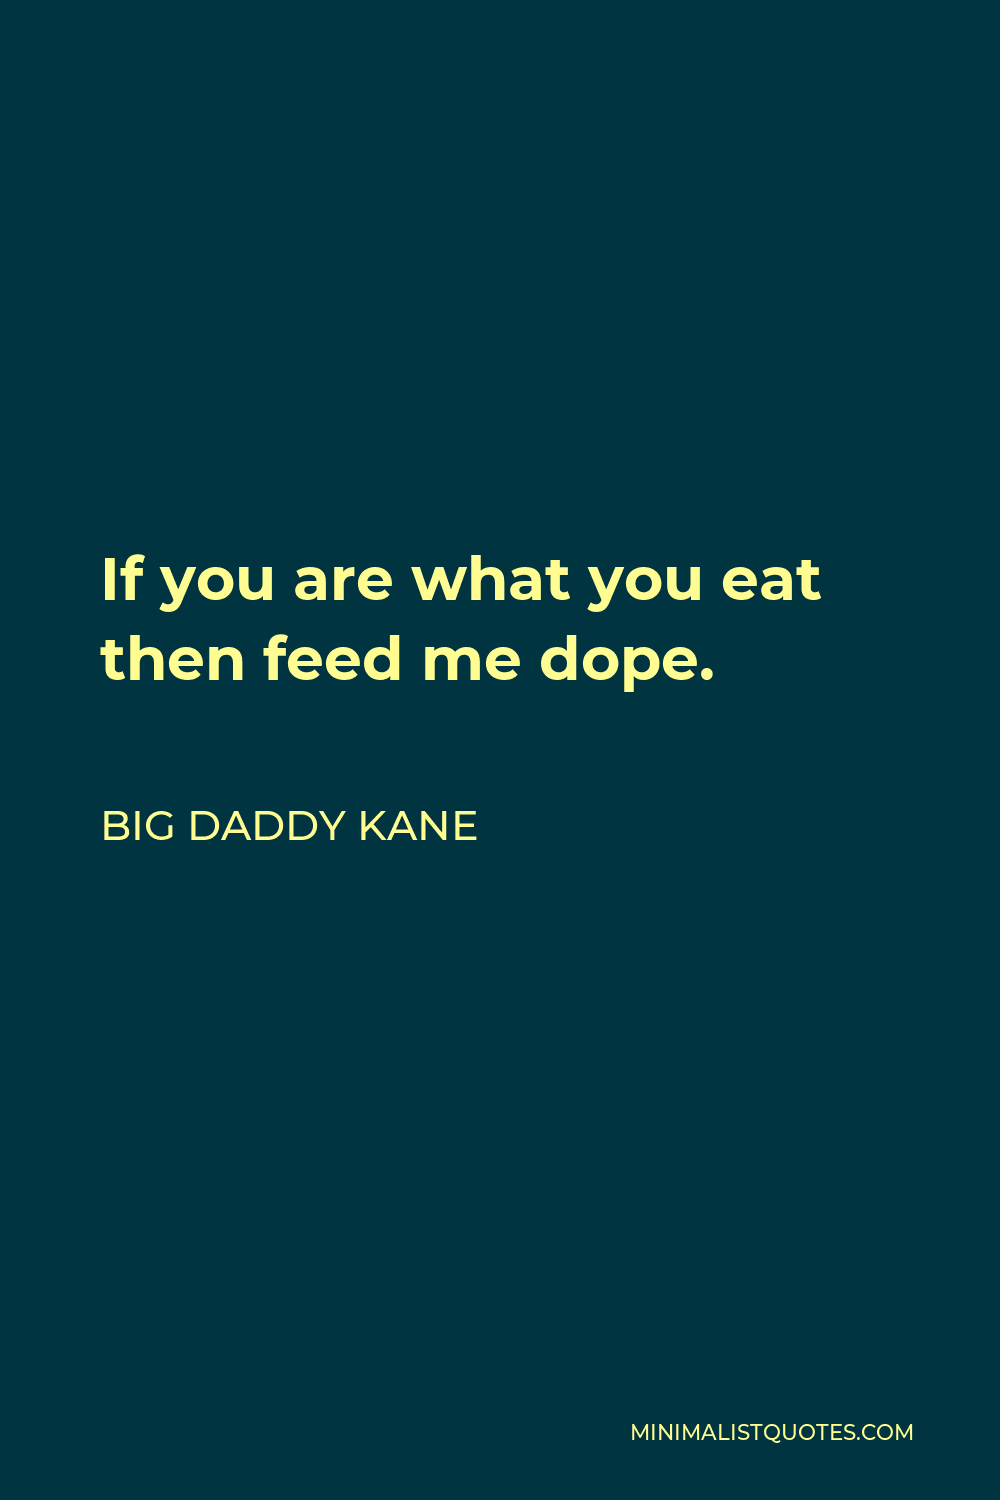 Big Daddy Kane Quote - If you are what you eat then feed me dope.